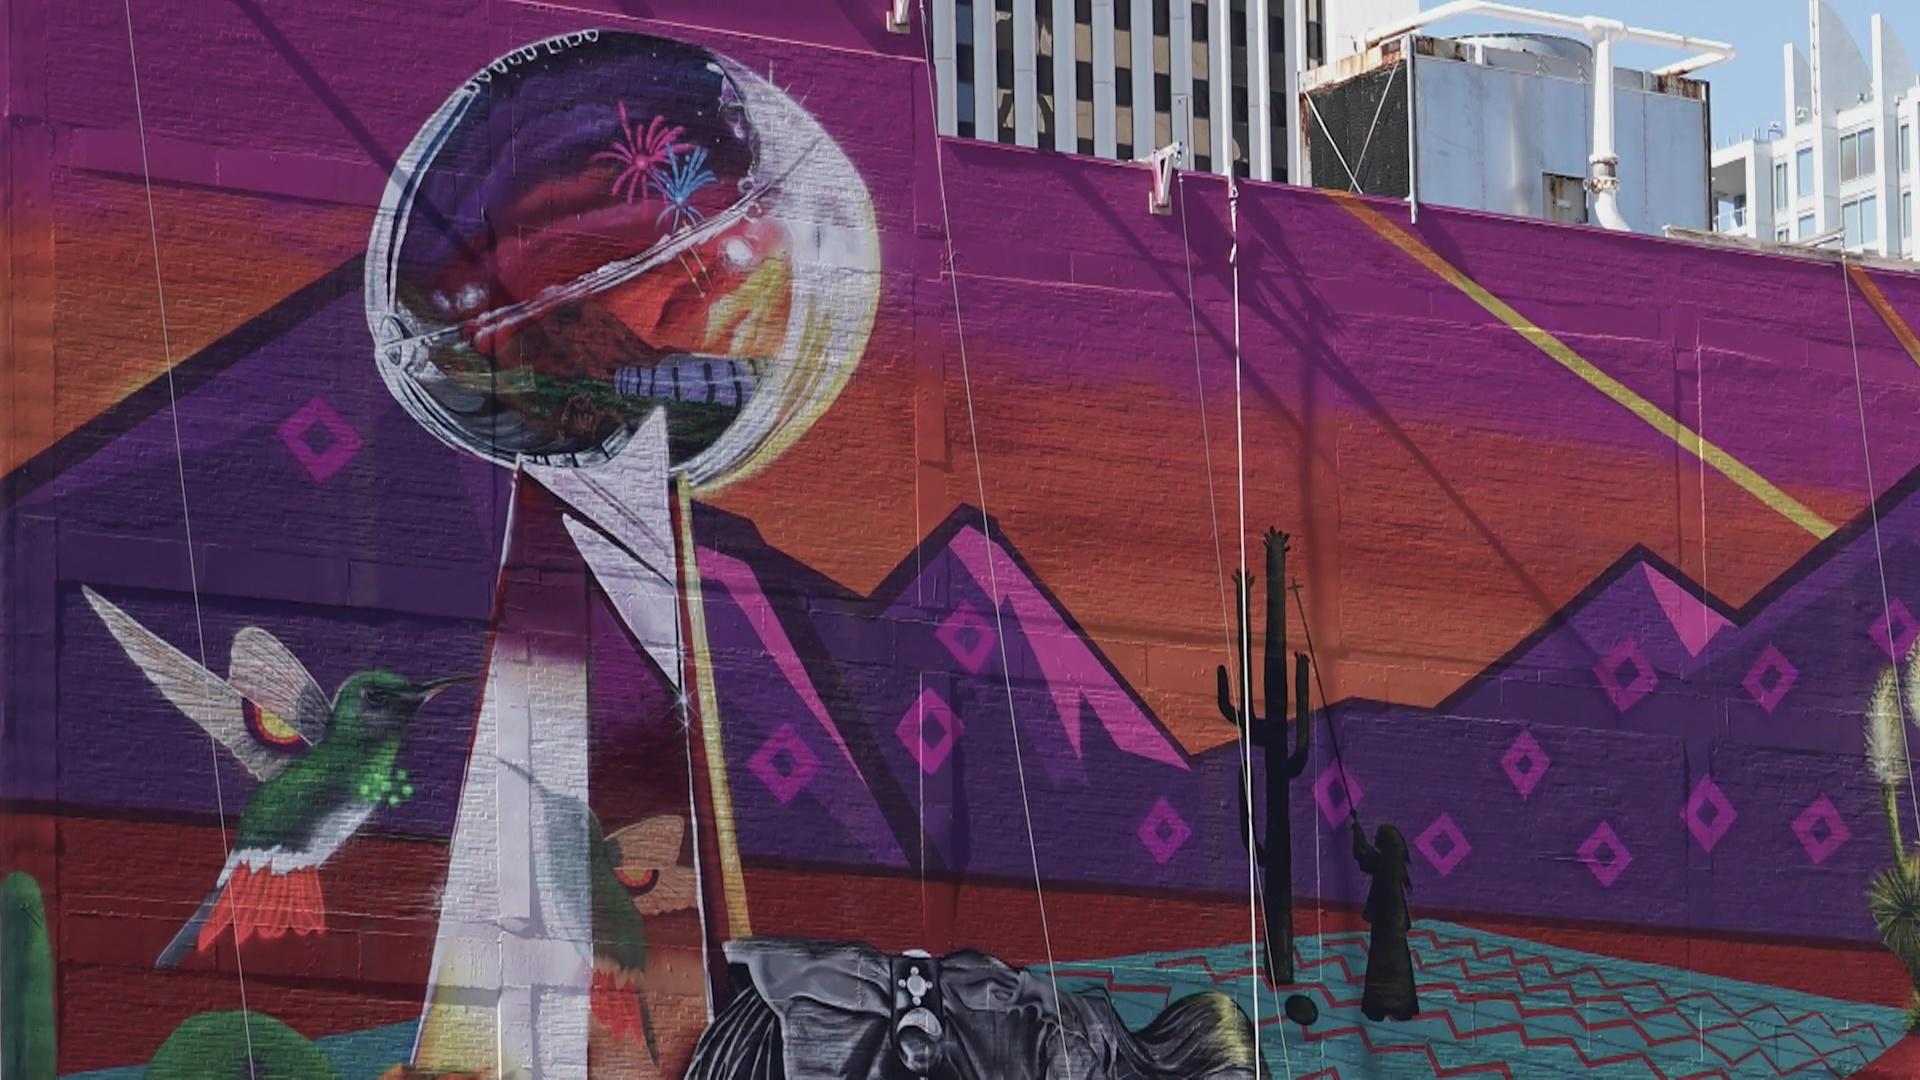 Largest Super Bowl mural to date painted by Indigenous artists in Phoenix